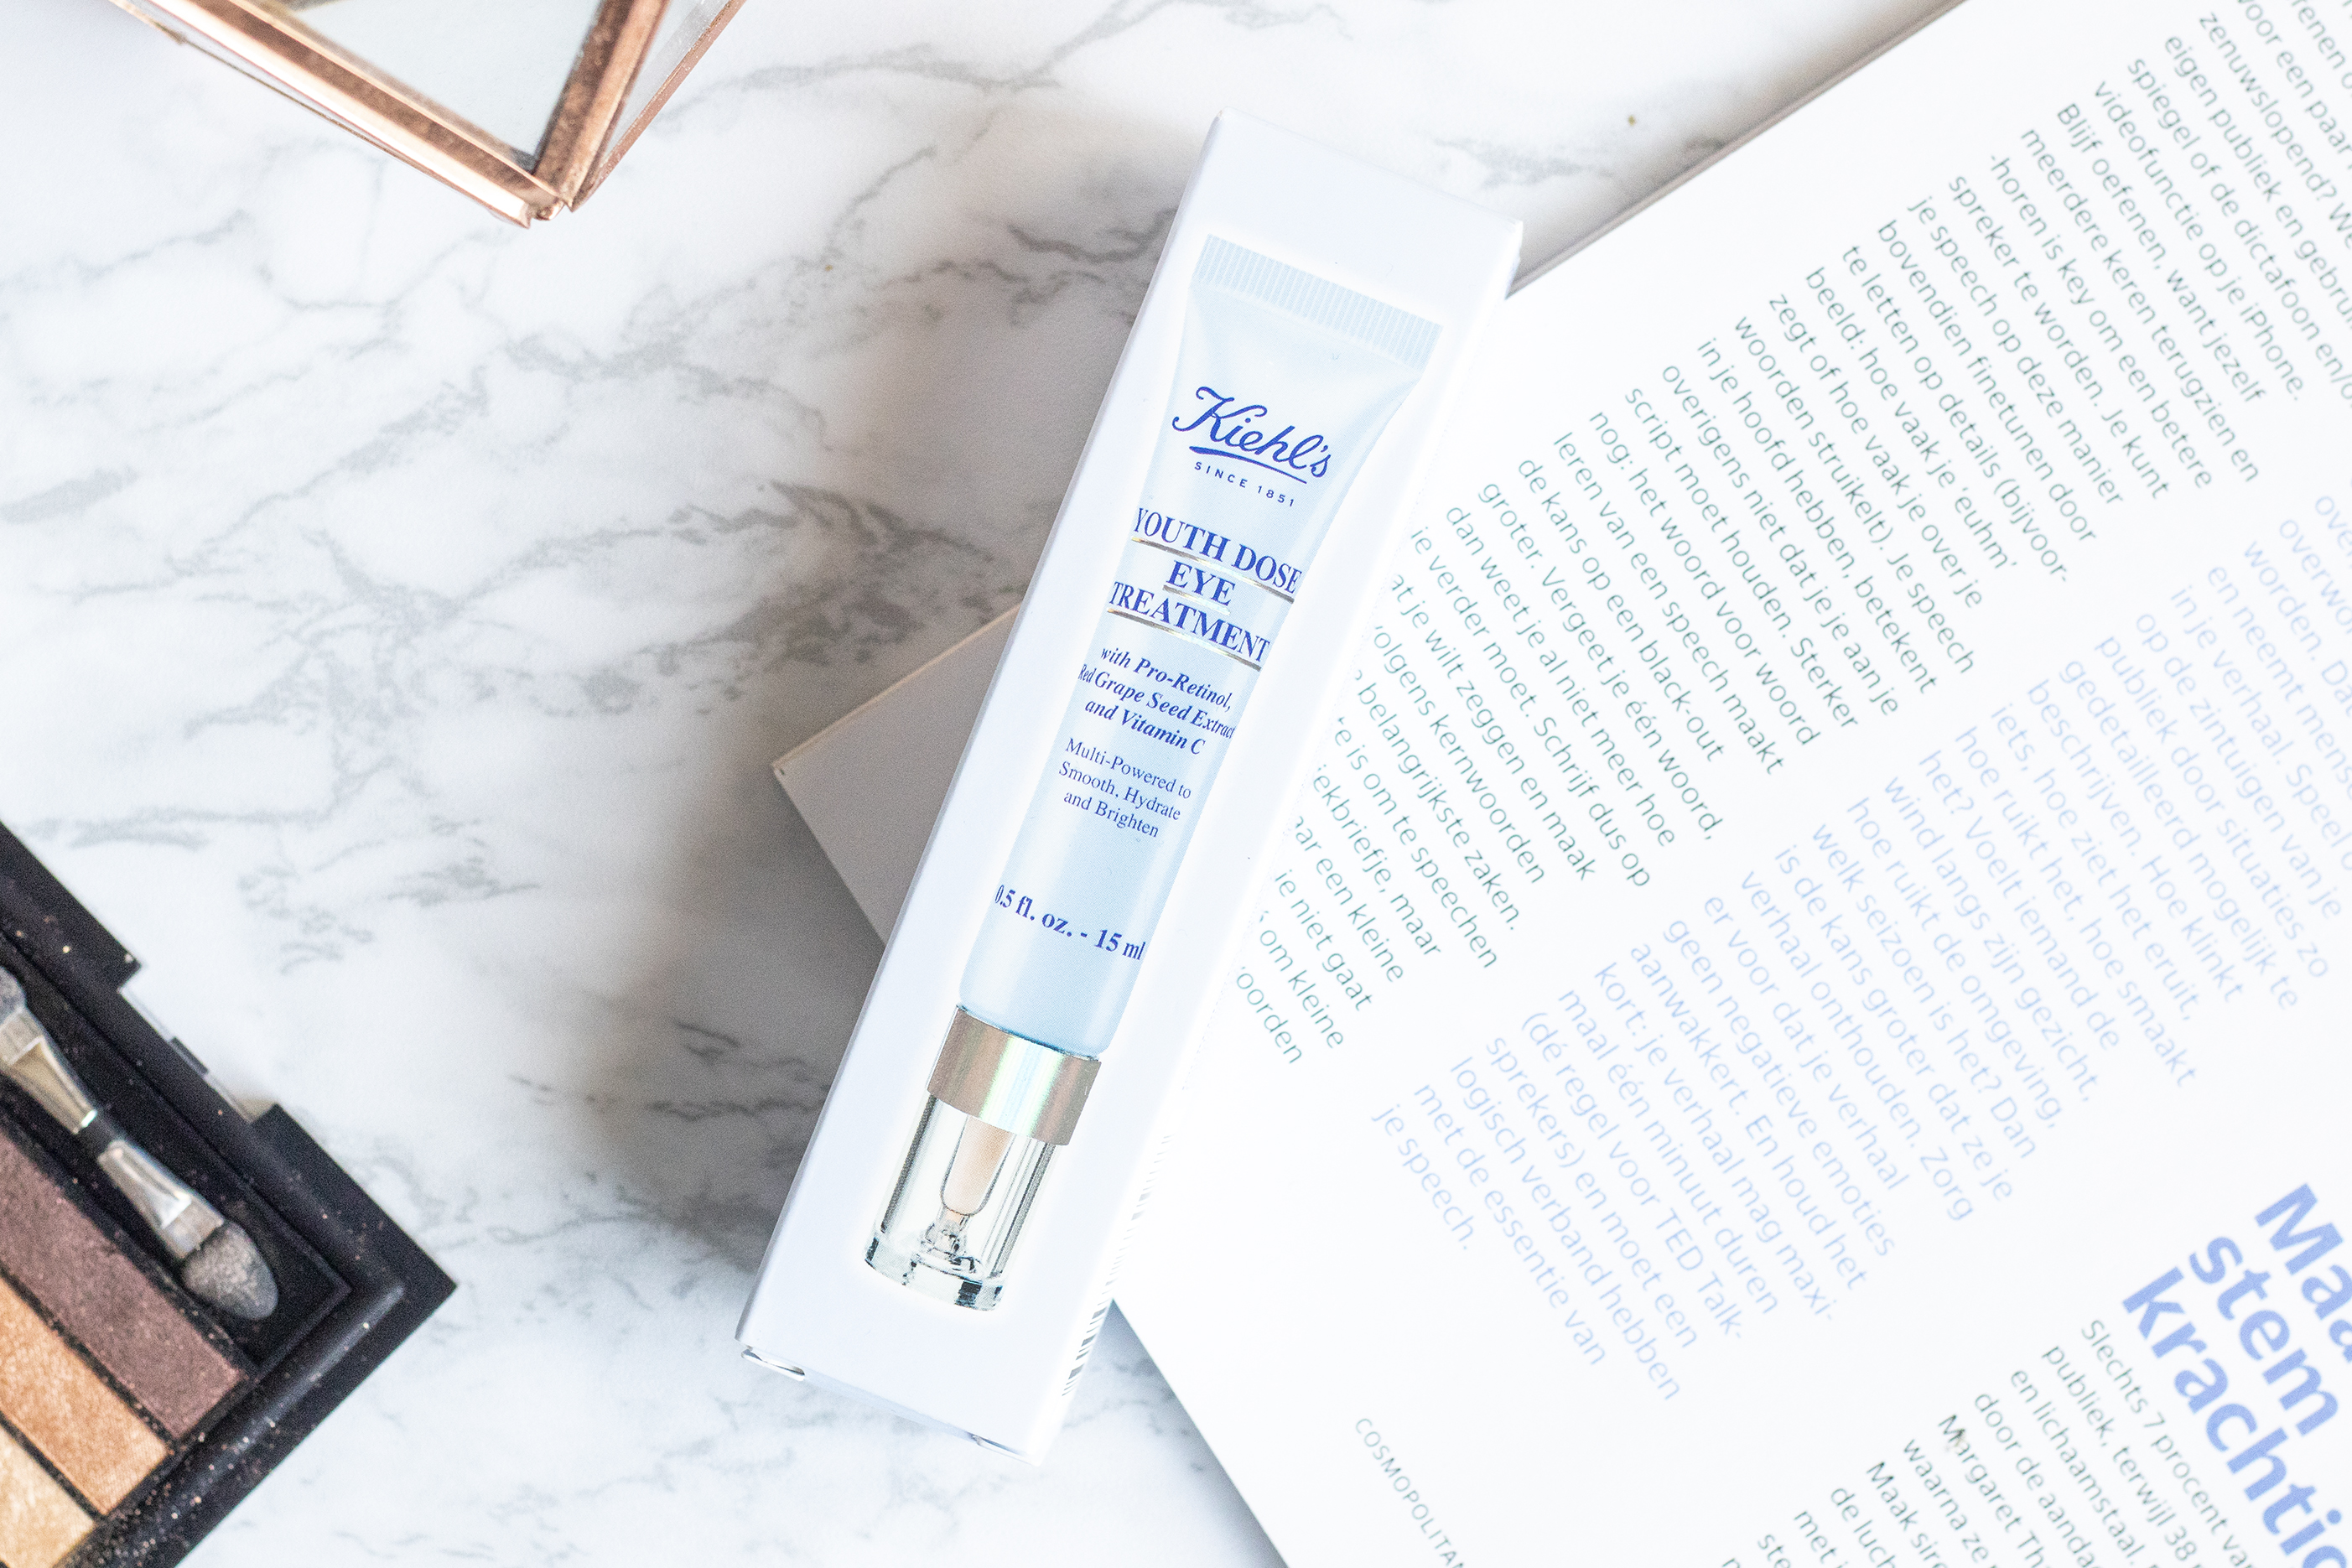 Kiehl's youth dose eye treatment review